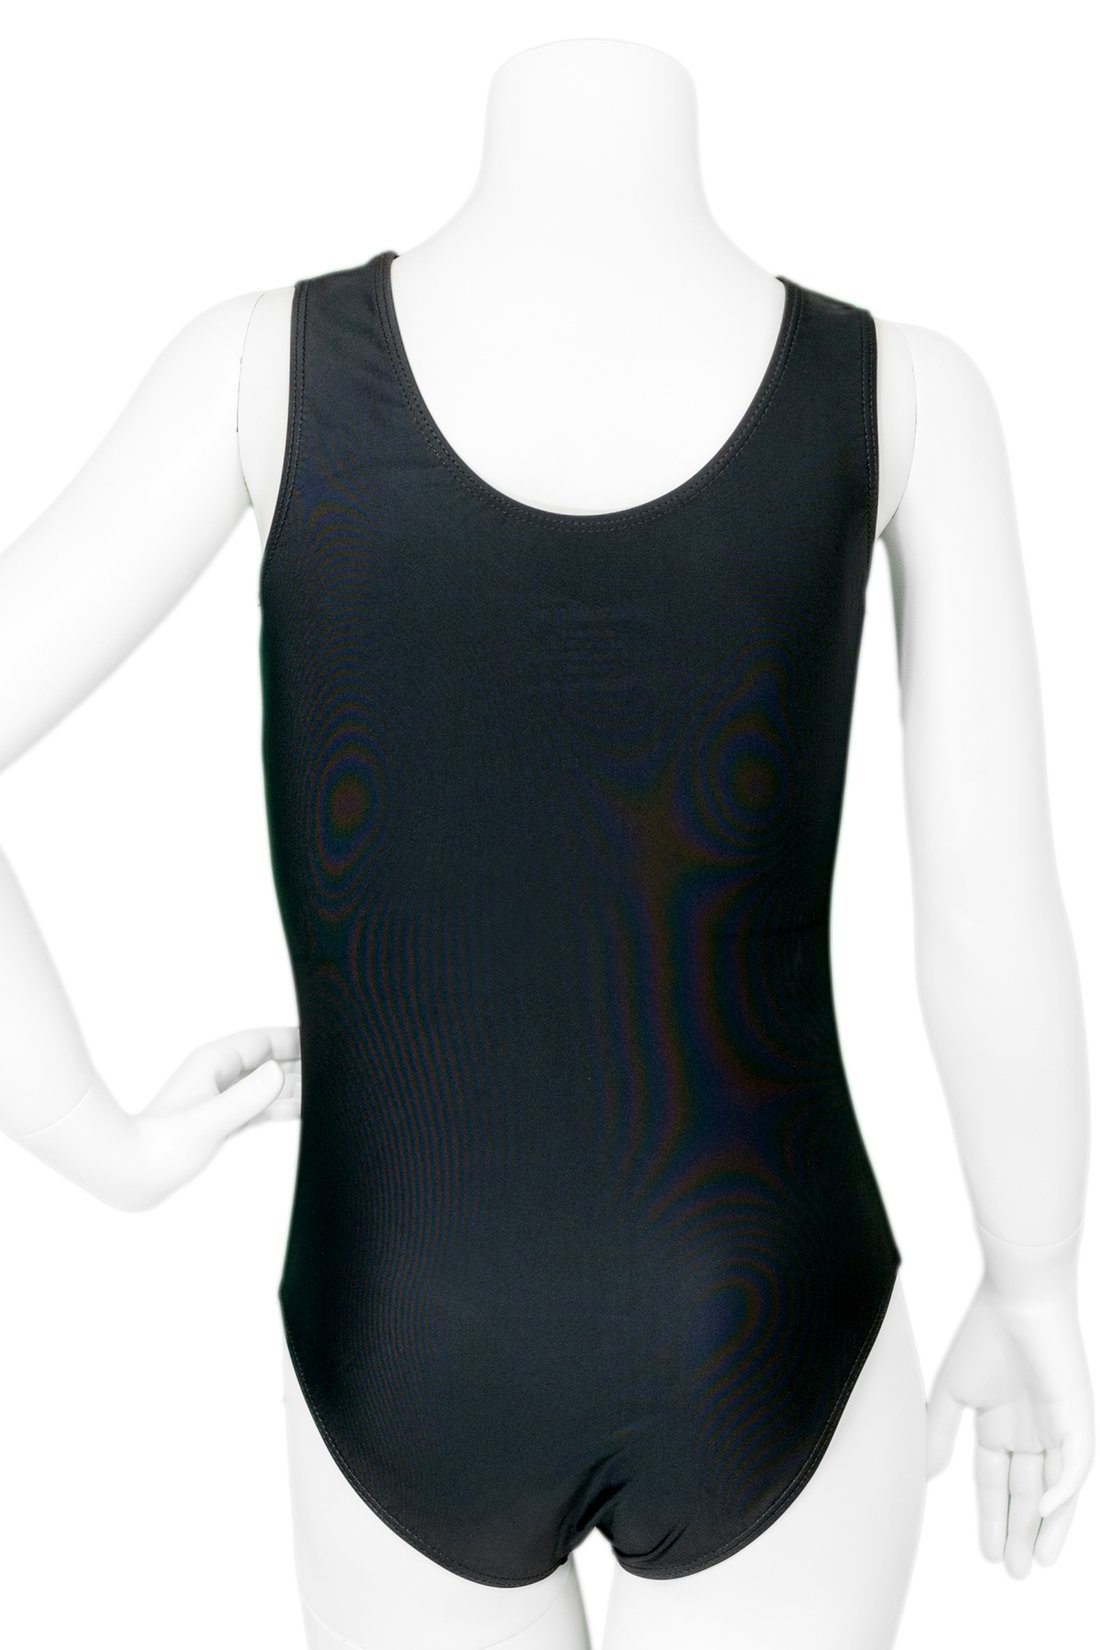 Gymnastics Leotard - Do It For You With Mesh Accents – Stick It Girl LLC